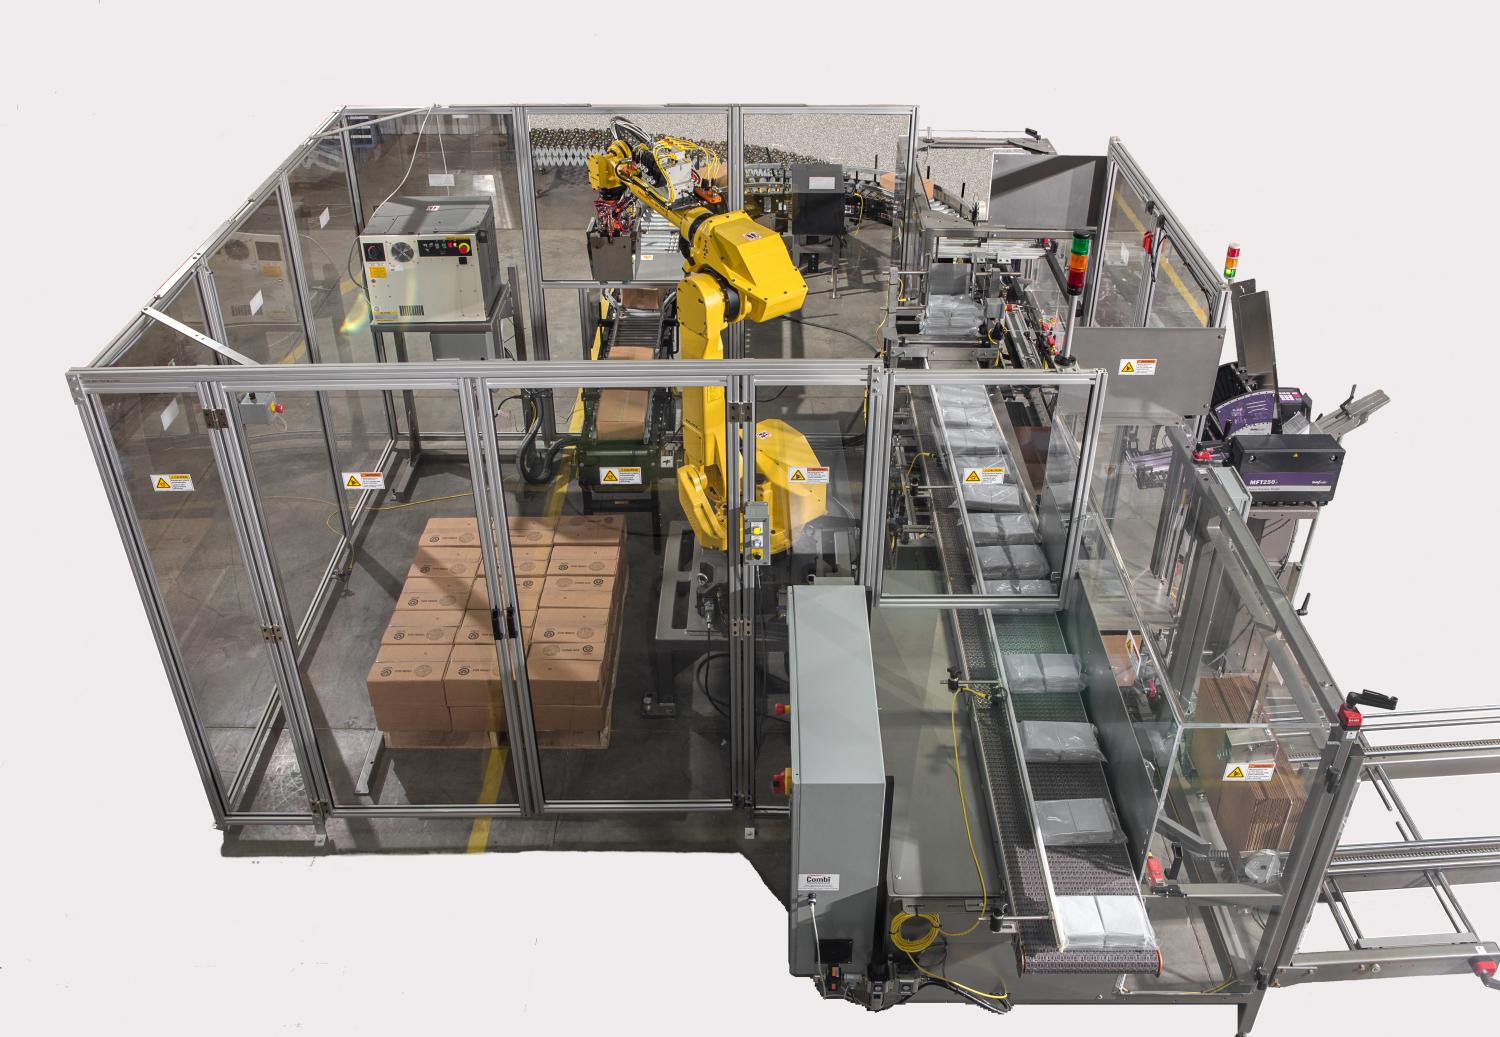 COMBI PACKAGING SOLUTIONS
COMBI ERGOPAKPAL ROBOTIC CASE PACKER AND PALLETIZER

